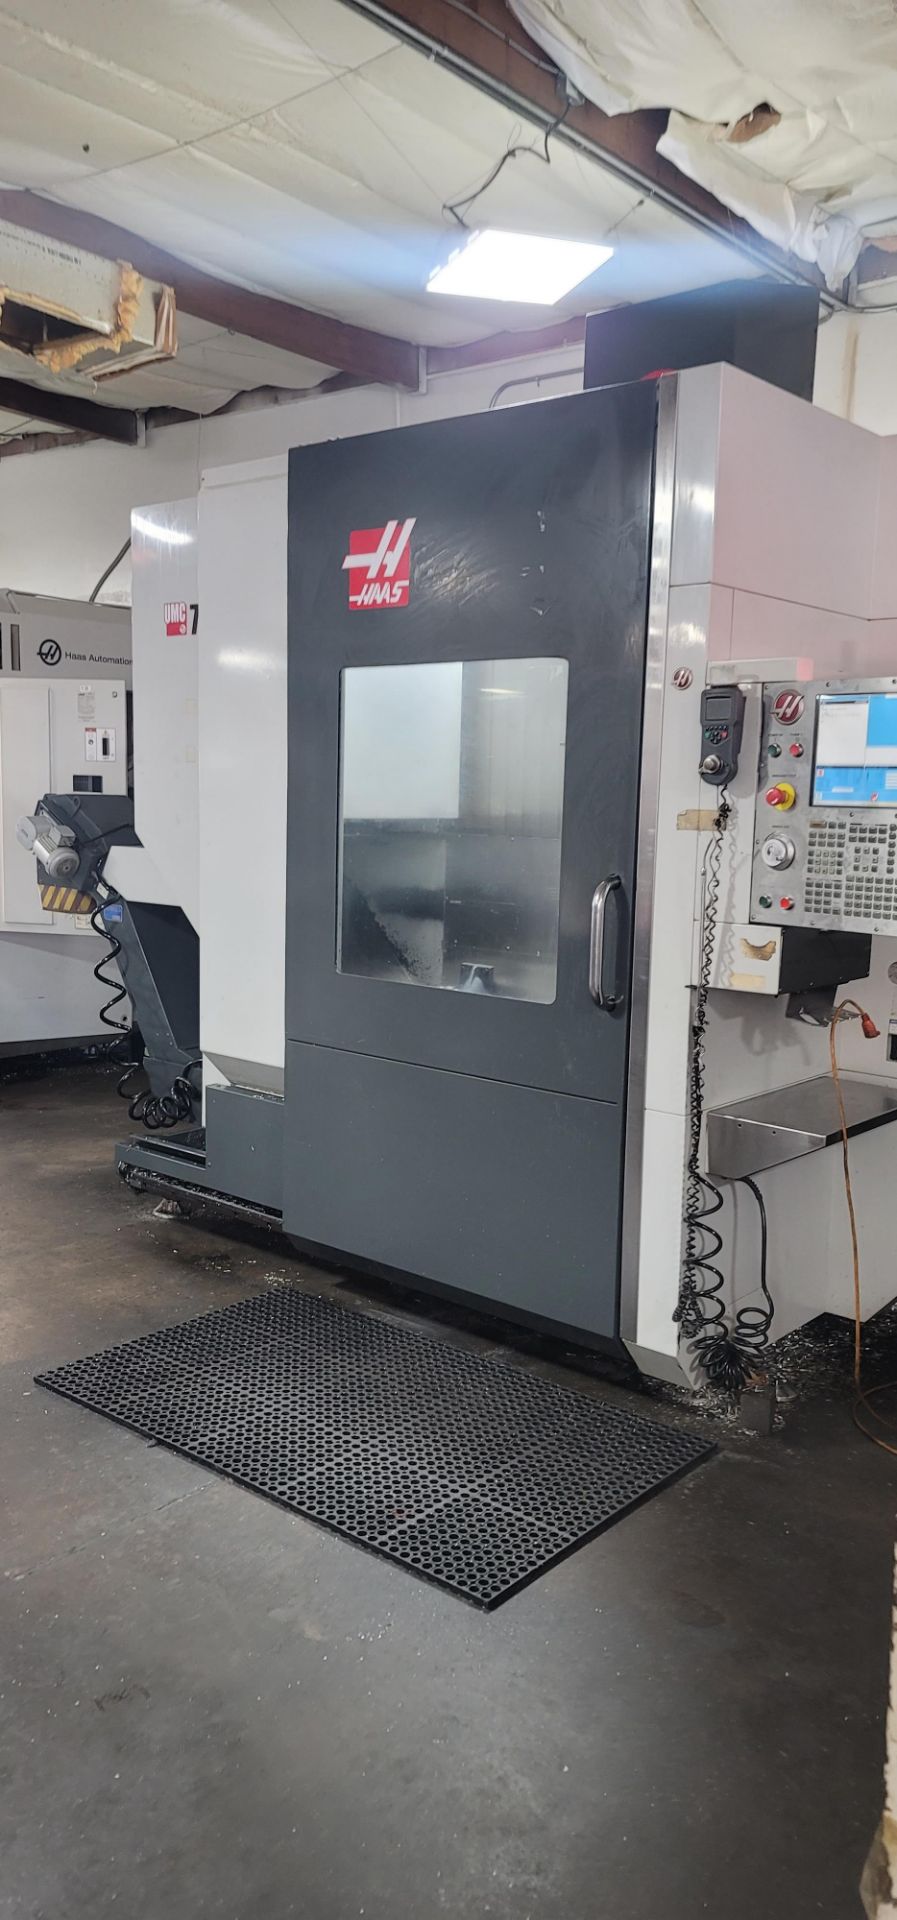 2016 HAAS UMC-750 5-Axis 12,000 rpm CNC Vertical Machining Center - Image 2 of 16